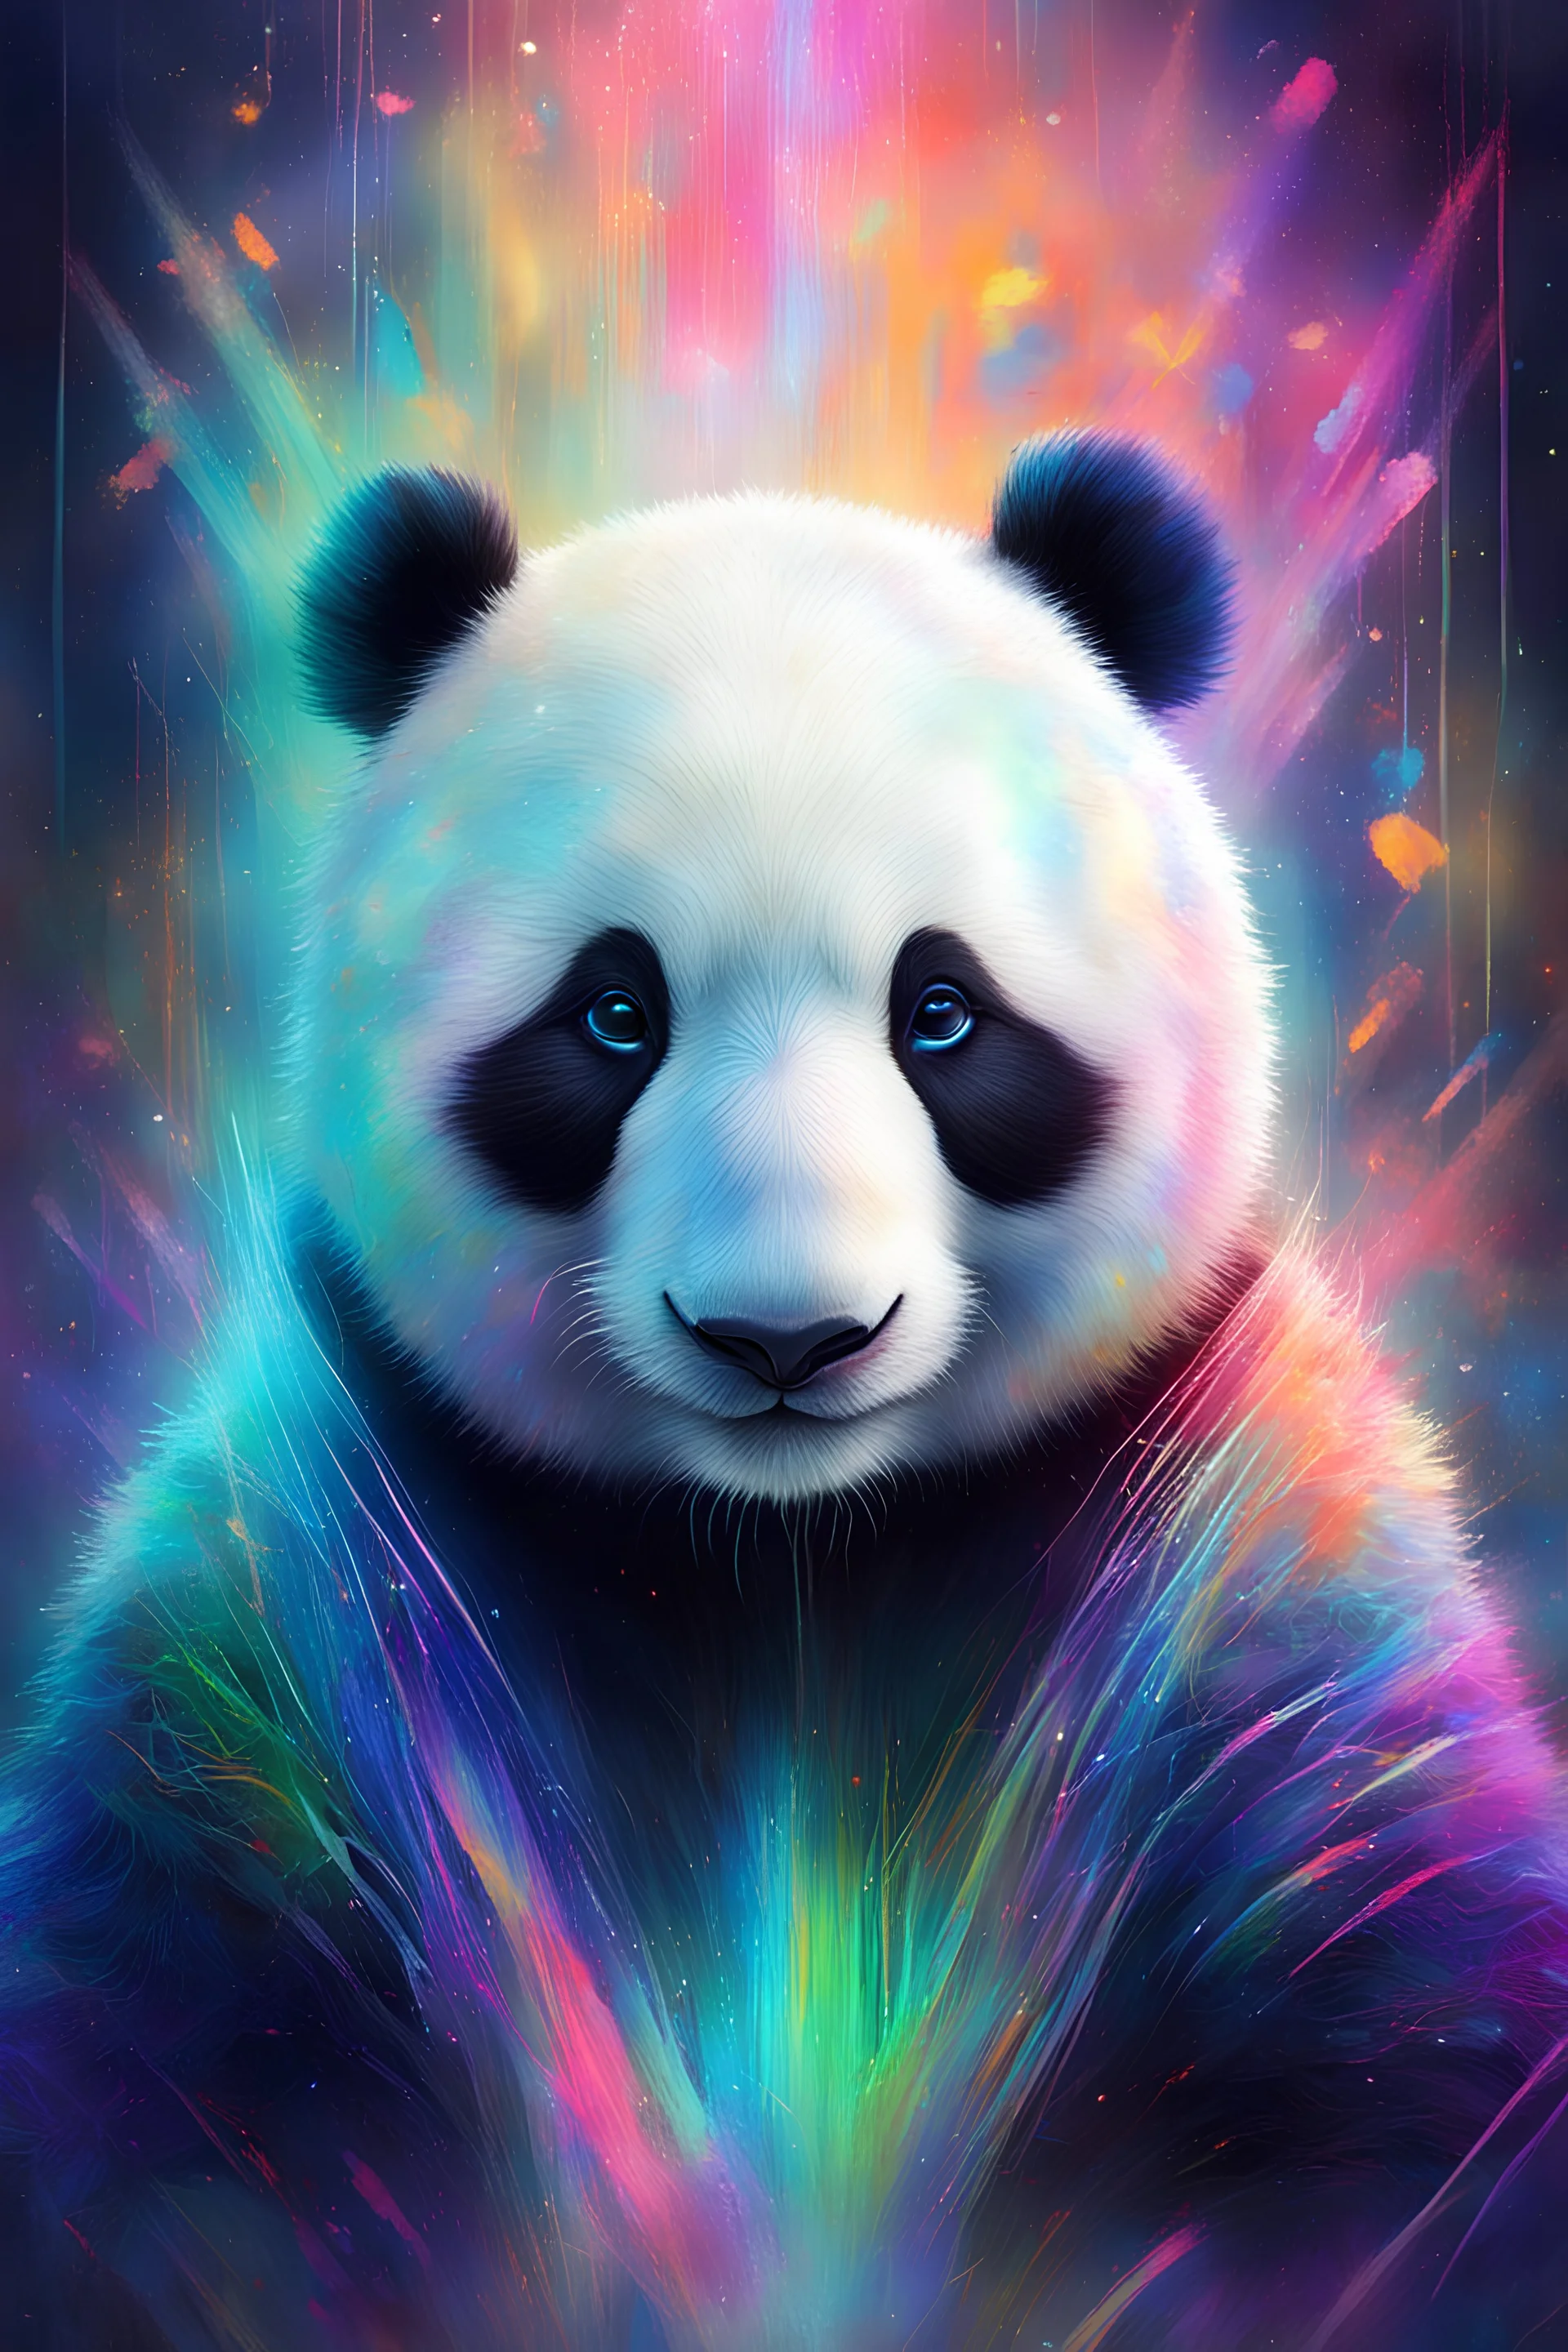 At the center of the composition stands DEEMU, a majestic panda with fur as white as snow, adorned with streaks of iridescent neon hues that pulsate with each beat of the music. Its eyes, pools of wisdom and mystery, seem to peer directly into the soul of the observer, inviting them to delve deeper into the auditory journey that lies ahead.